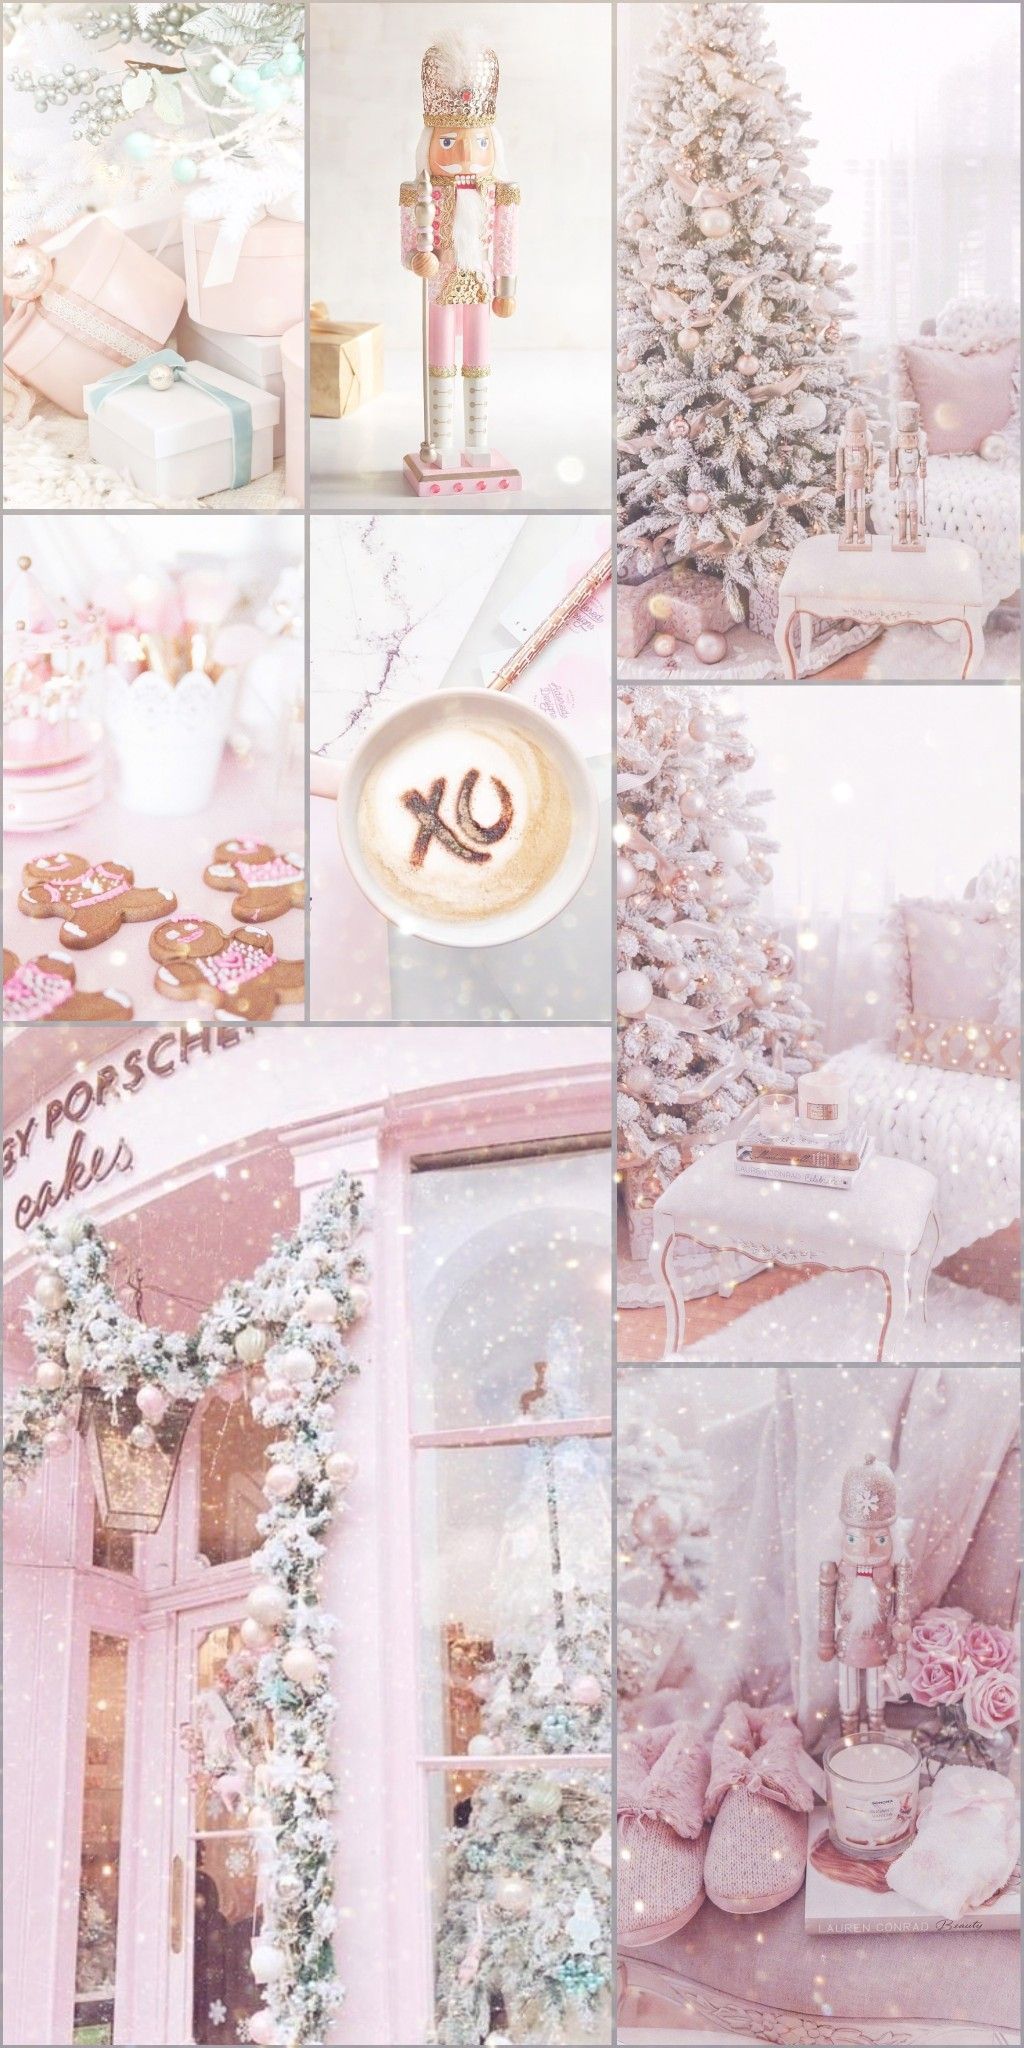 A collage of pictures with christmas decorations - Christmas, white Christmas